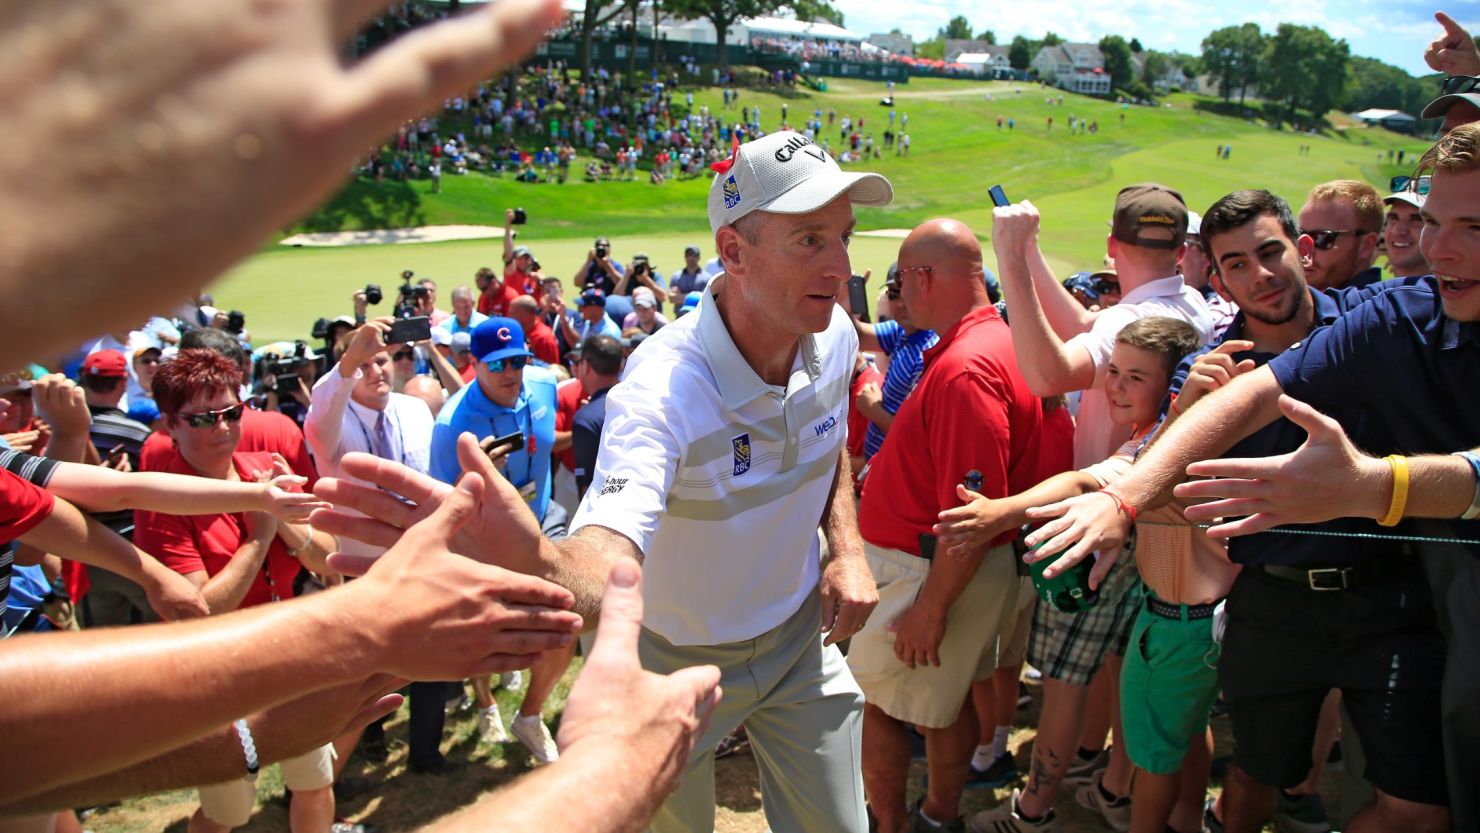 Jim Furyk has been named US Ryder Cup captain for the 2018 matches in Paris, France.